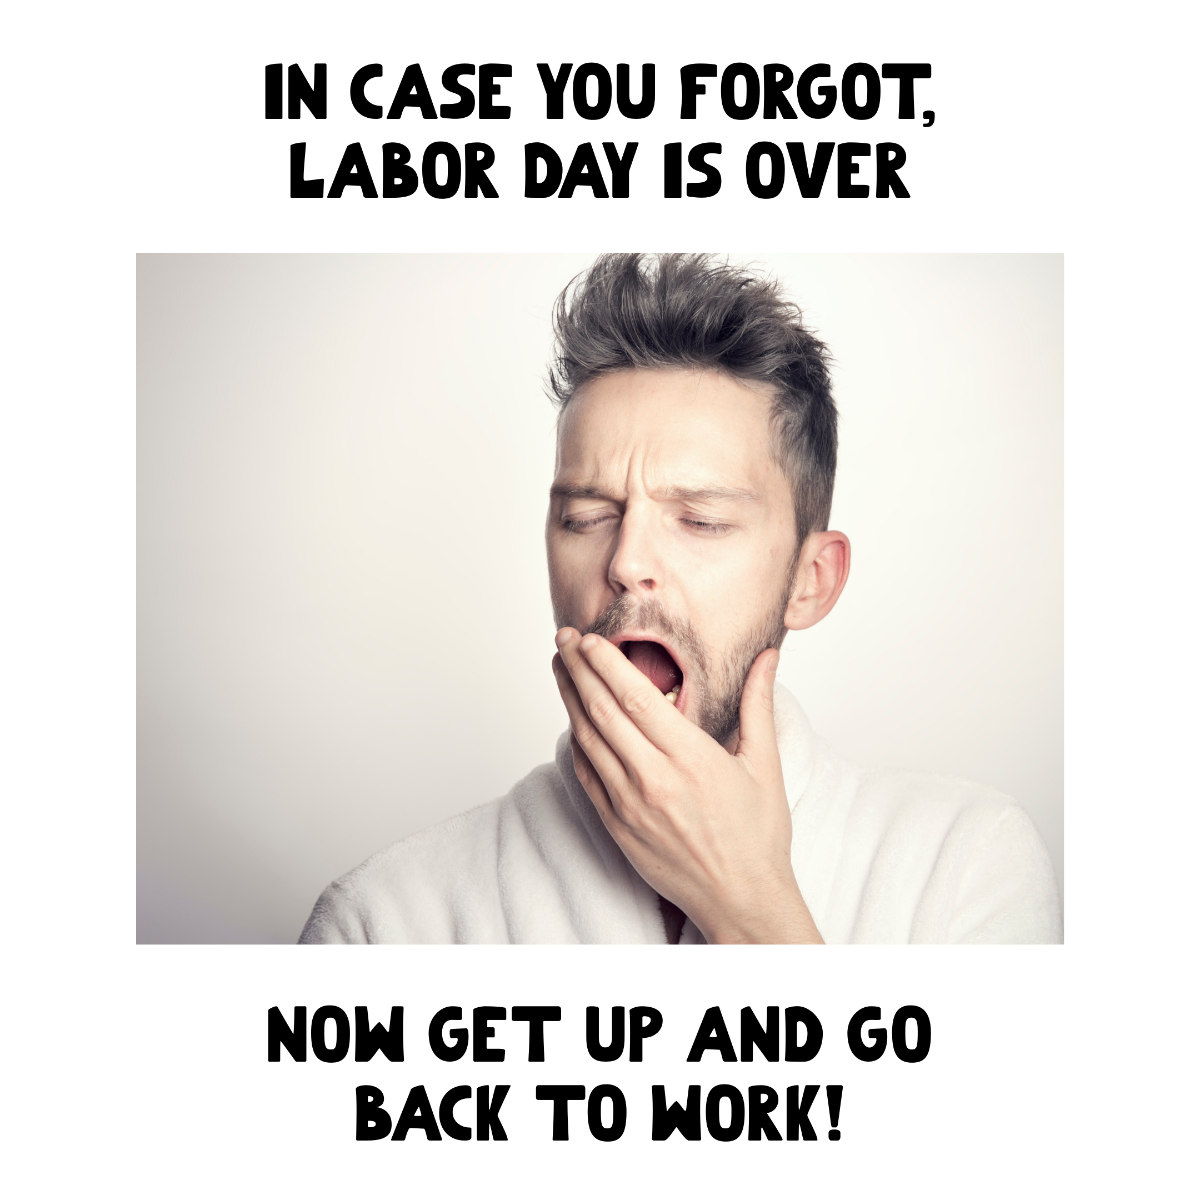 Free Back To Work After Labor Day Meme